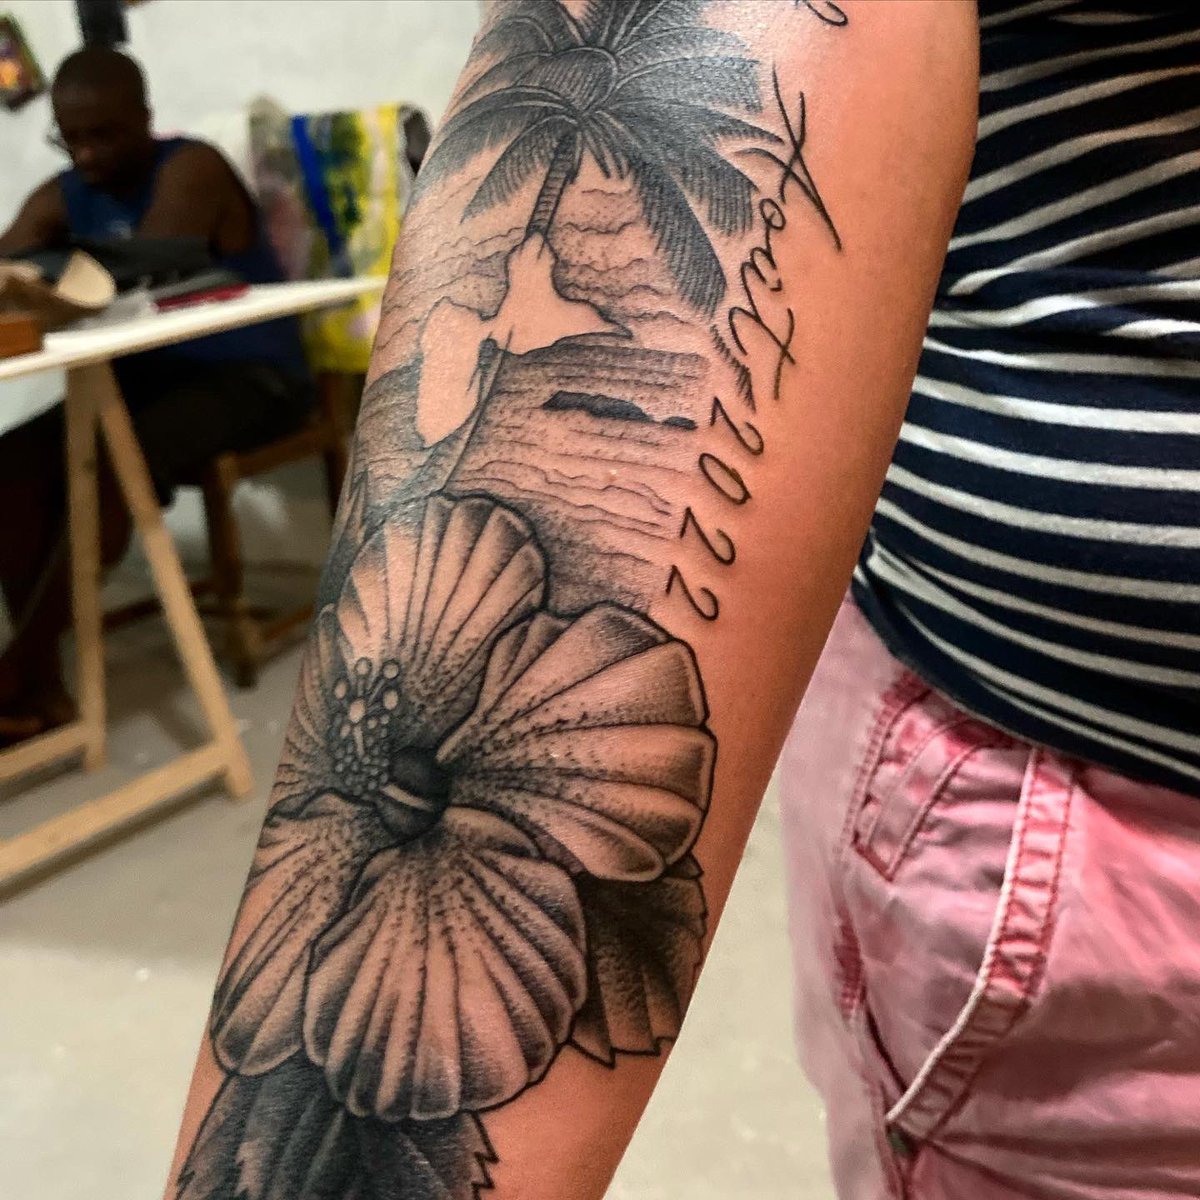 COVER! #guadeloupe #tattoo #tattoocoverup #whipitgood #hibiscus #flowertattoo #frenchtattooartist #youreinthearmynow